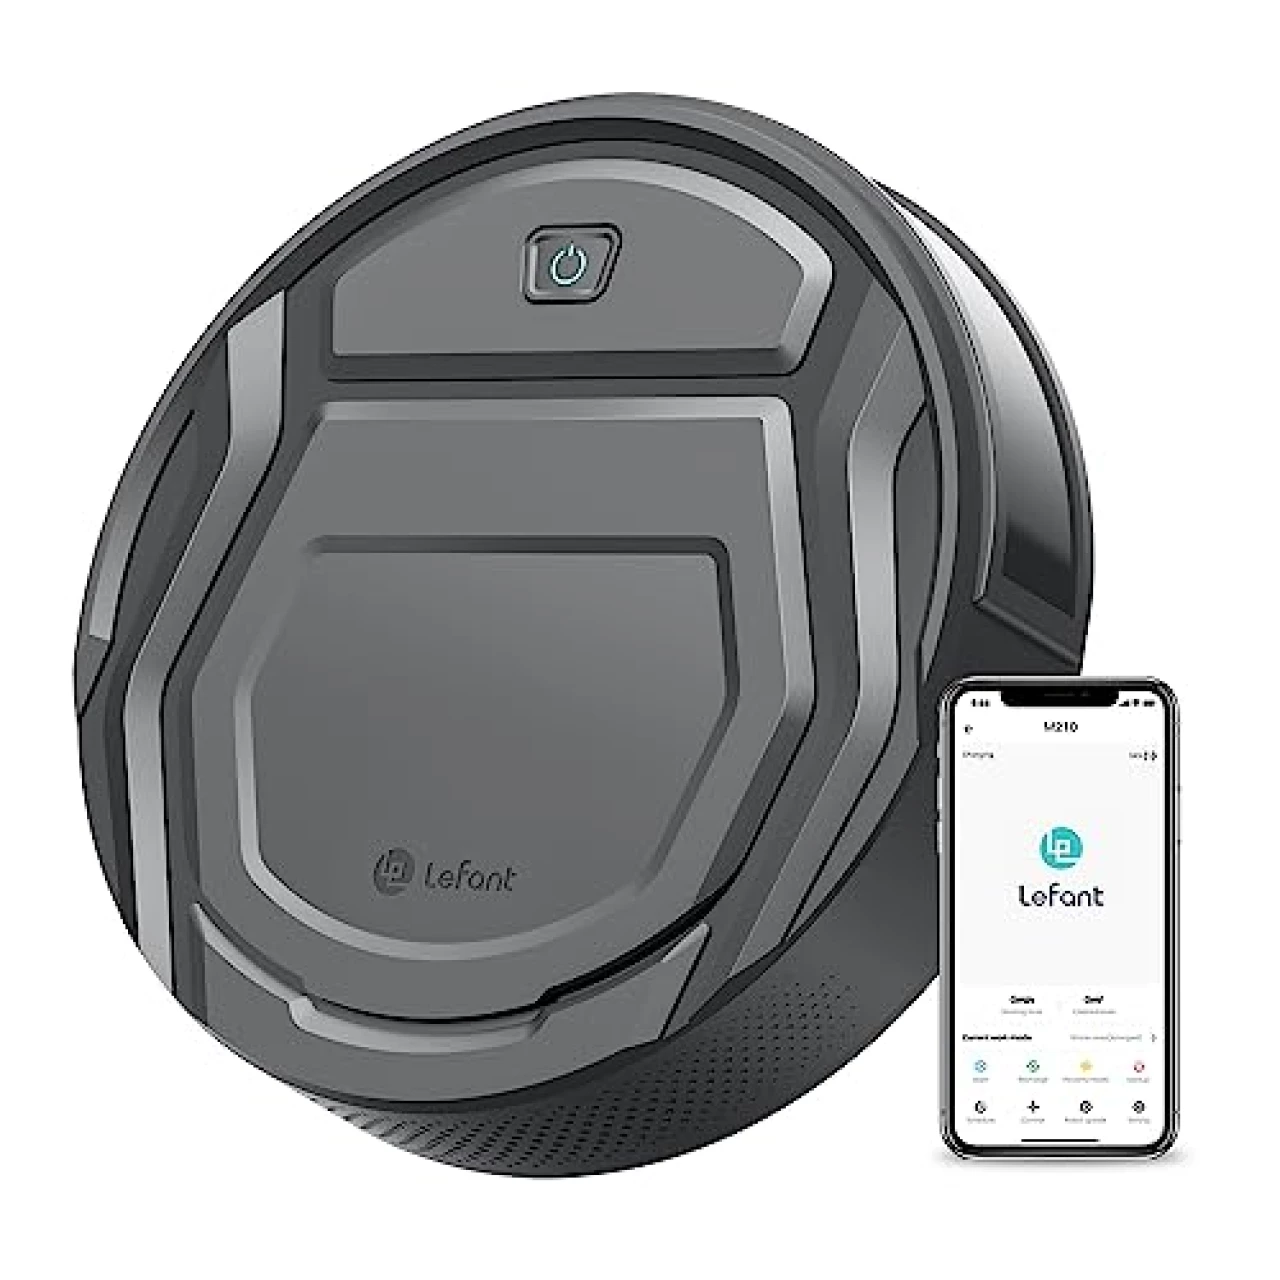 Lefant M210 Pro Robot Vacuum Cleaner, Tangle-Free 2200Pa Suction, Slim, Quiet, Self-Charging Wi-Fi/APP Remote Connected Robotic Vacuum Cleaner, Work with Alexa, Ideal for Pet Hair, Hard Floors